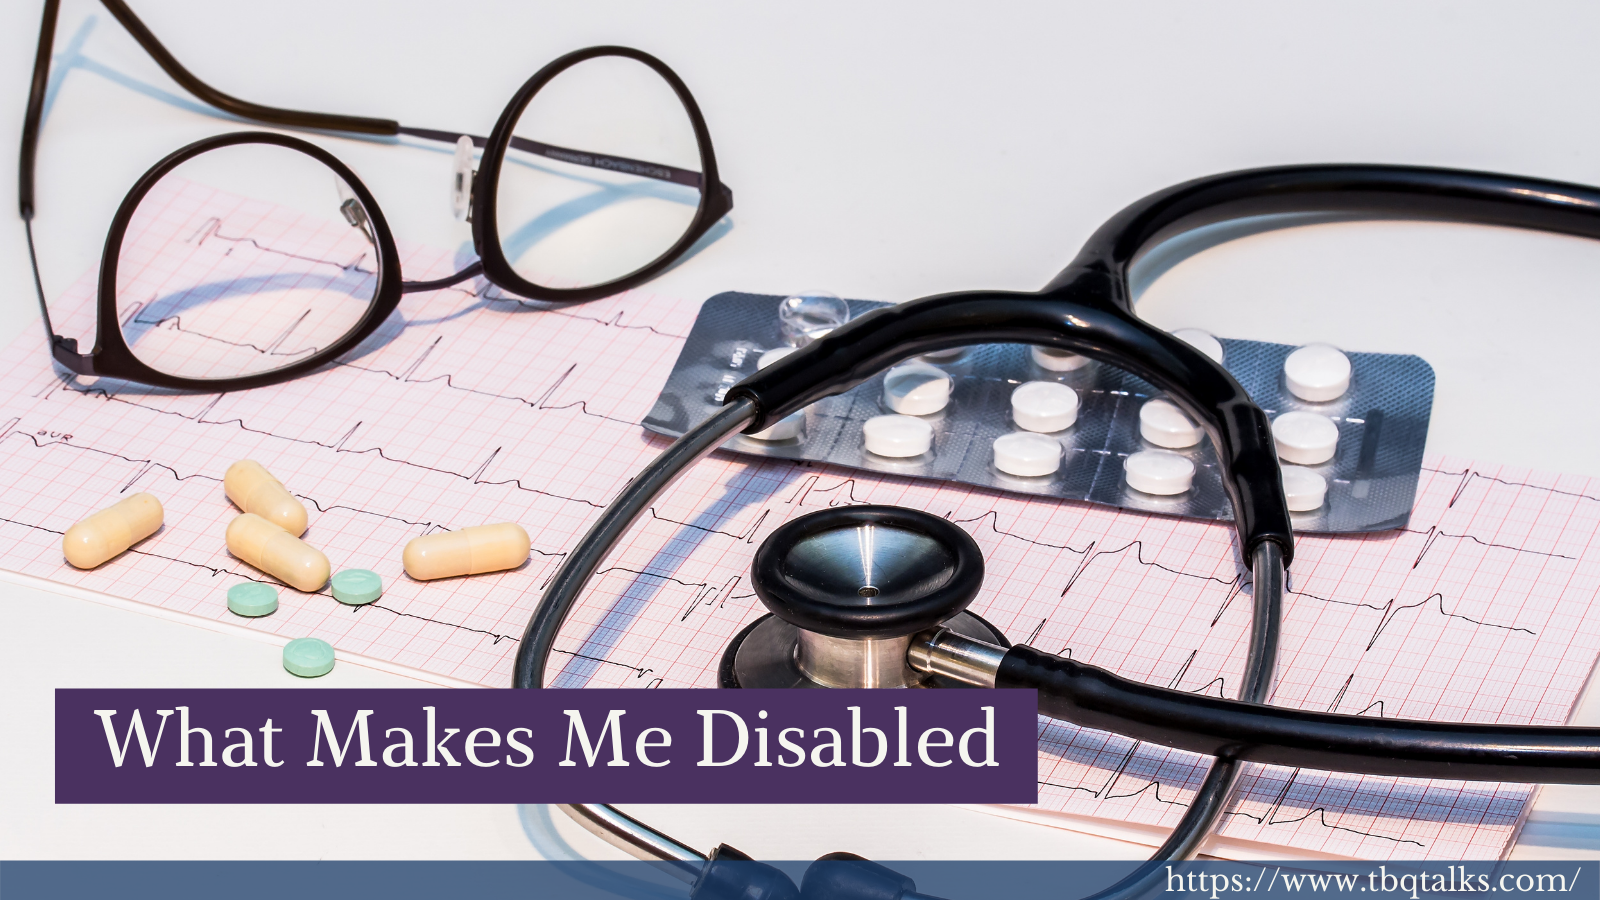 What Makes Me Disabled